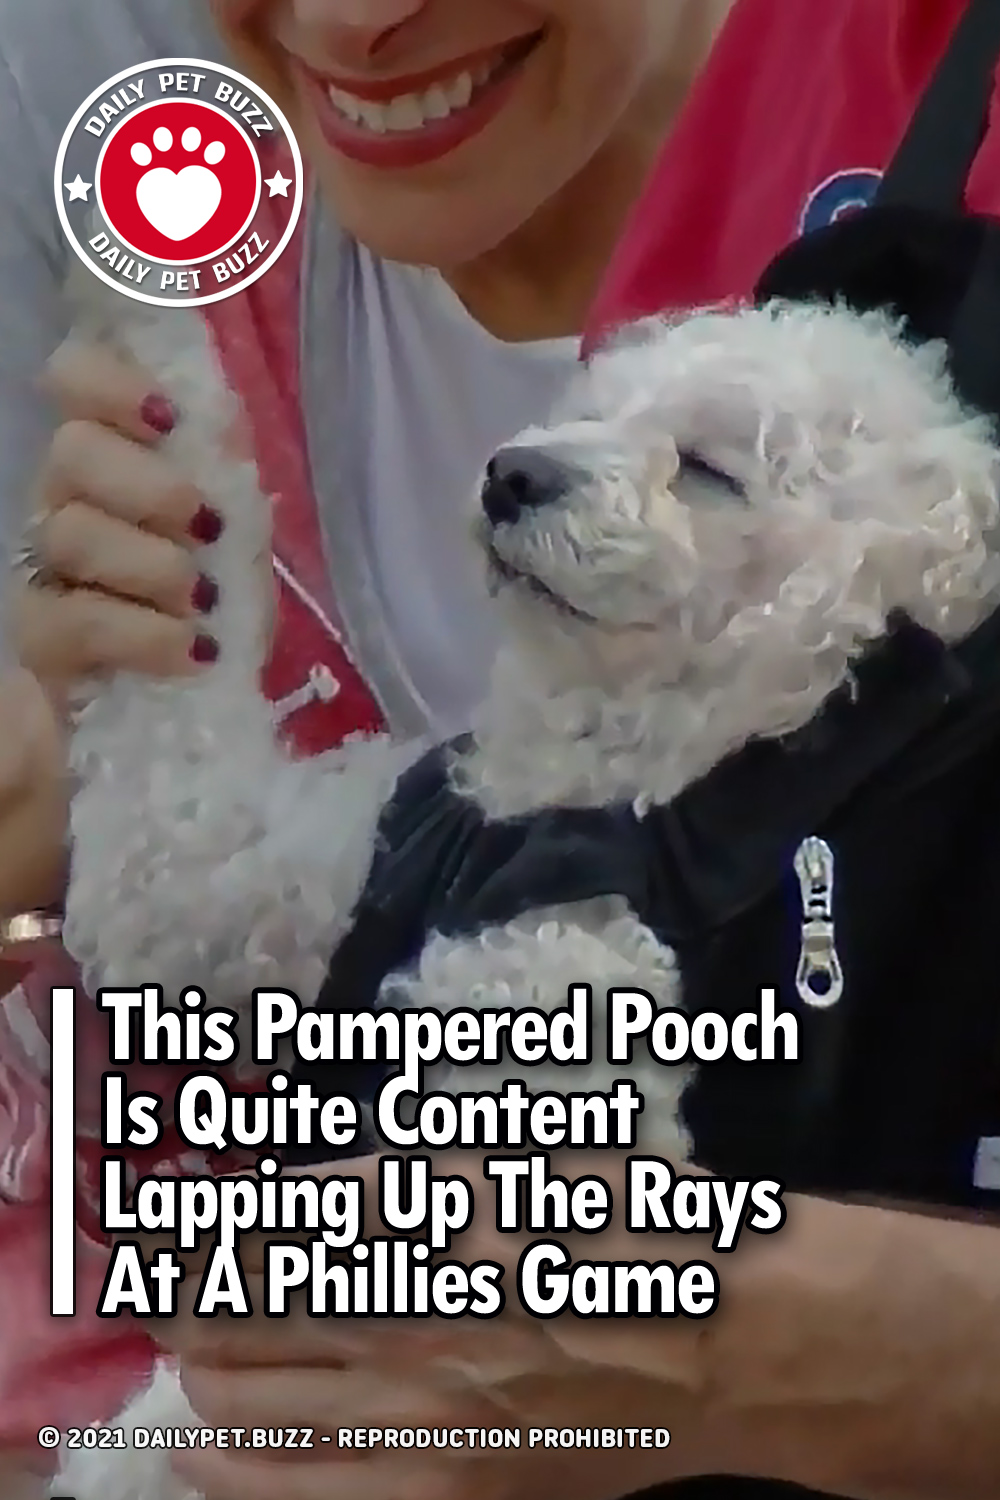 This Pampered Pooch Is Quite Content Lapping Up The Rays At A Phillies Game